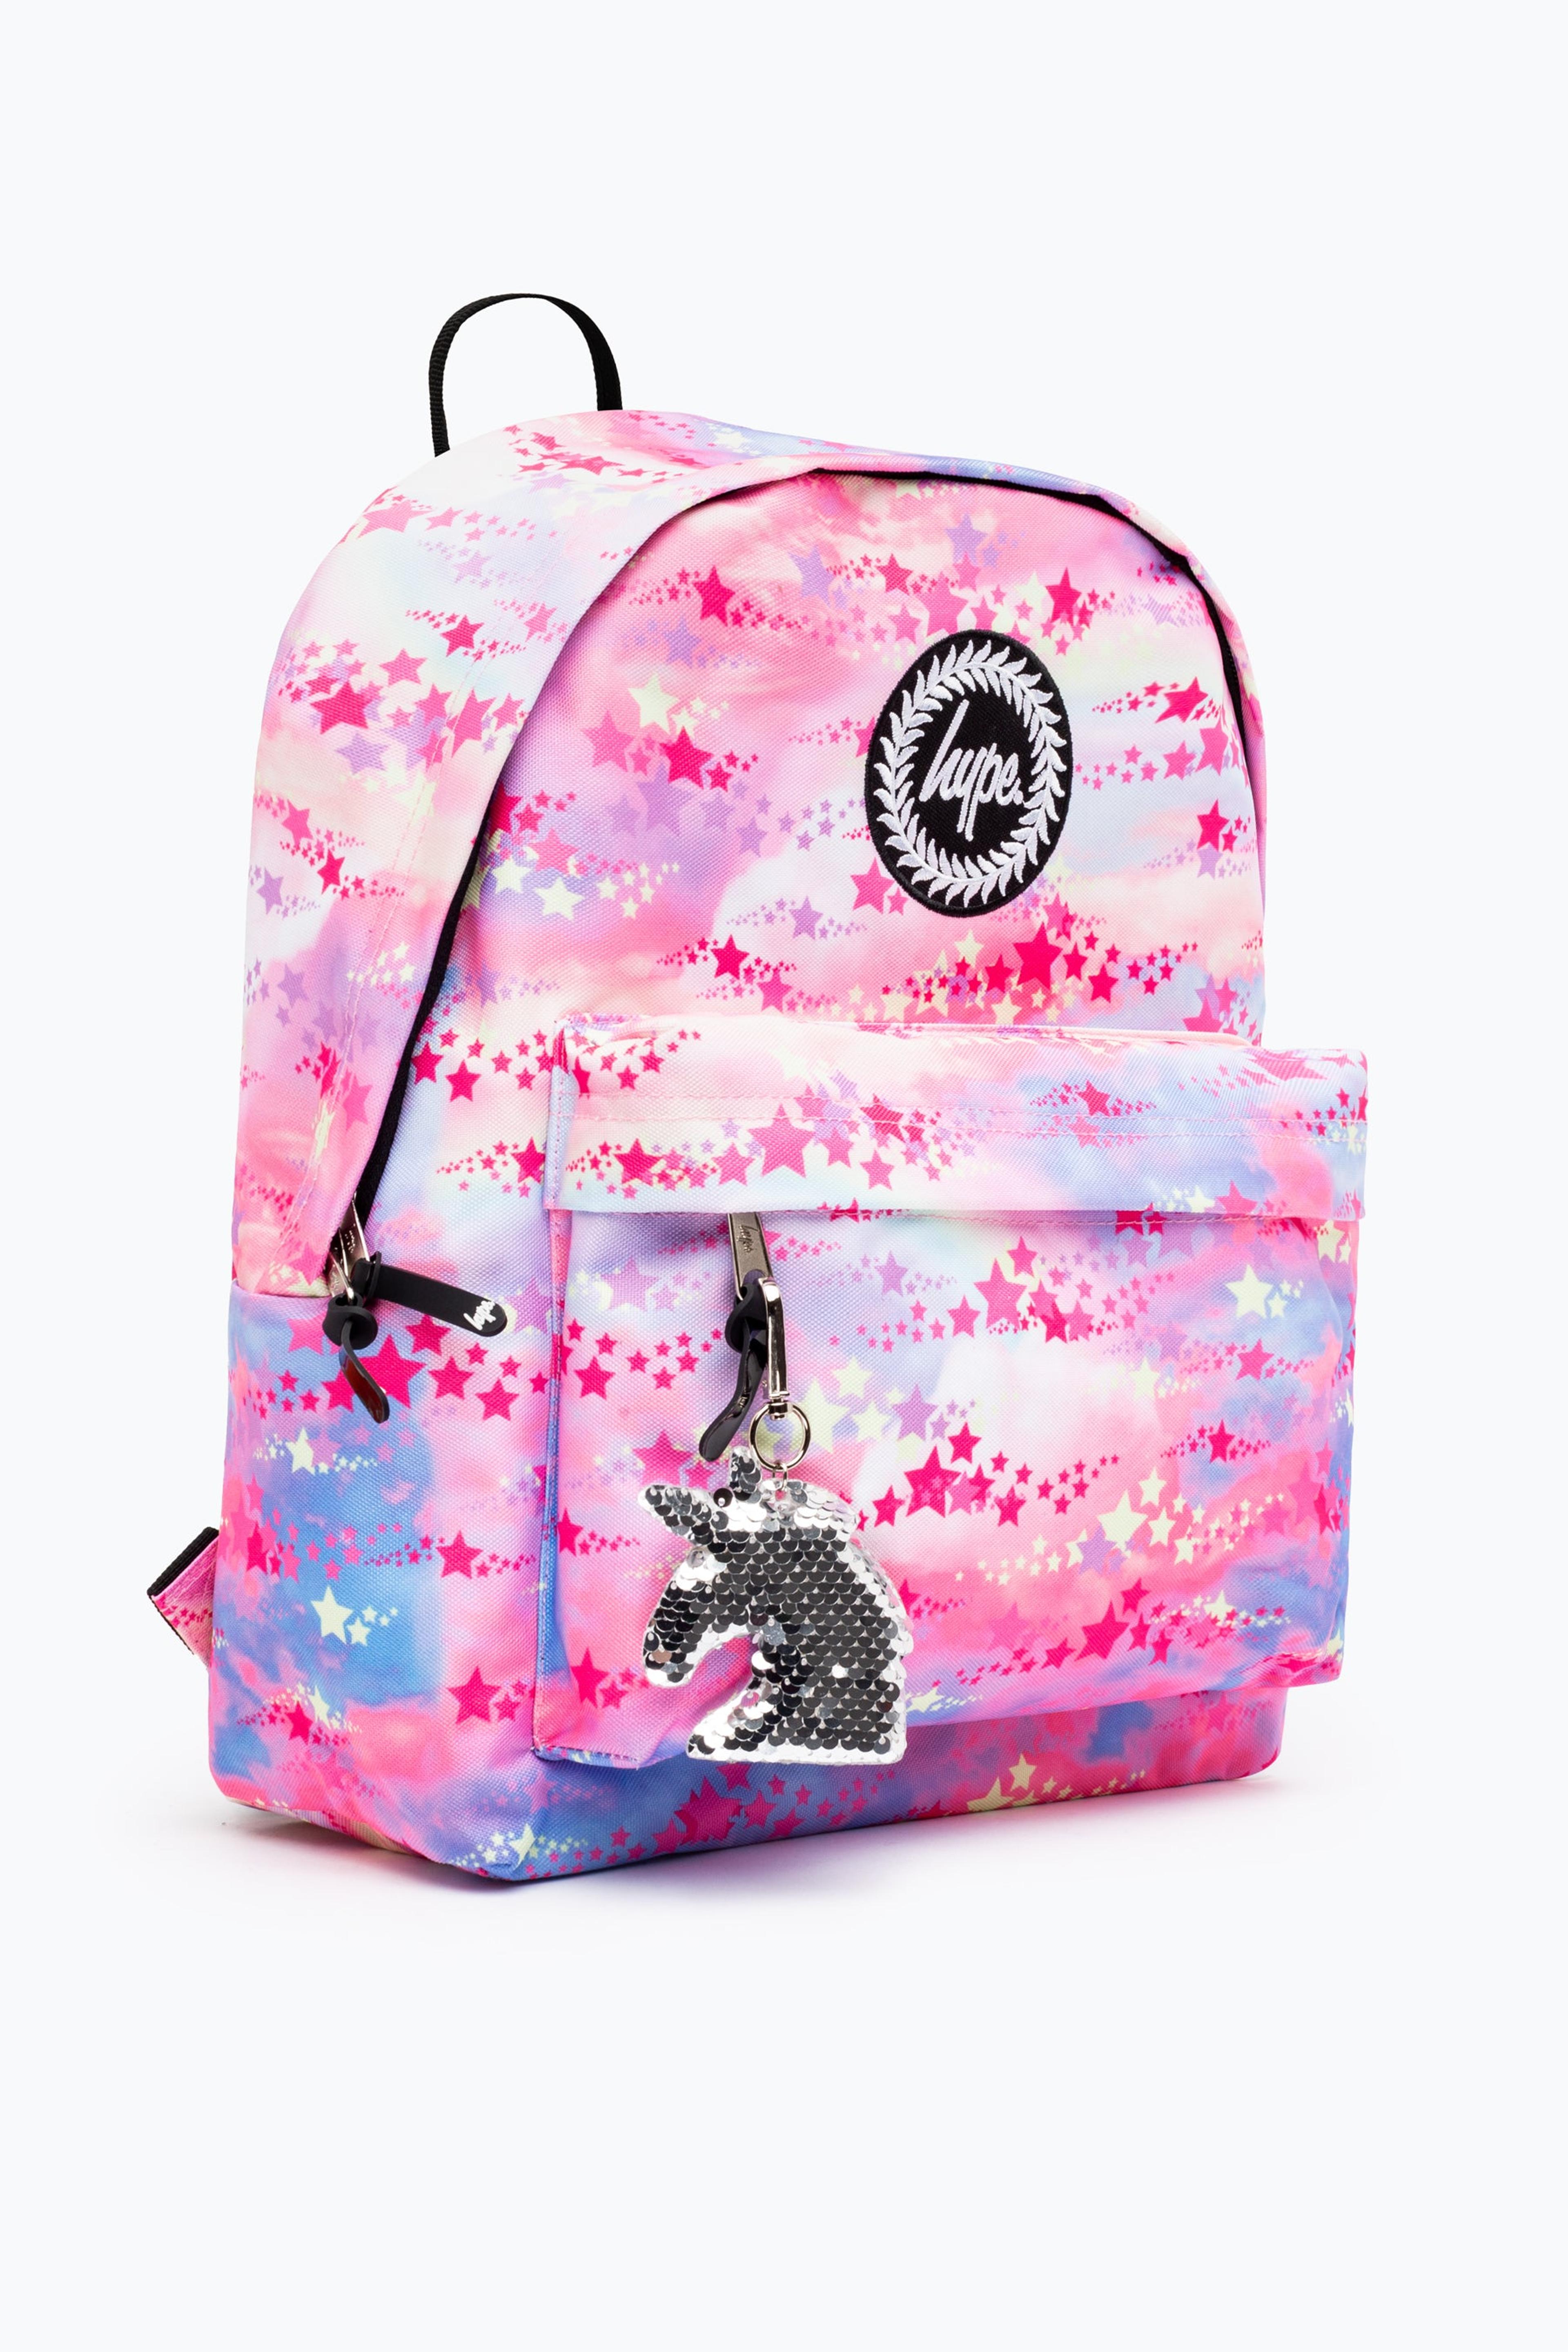 Alternate View 1 of HYPE PASTEL RAINBOW STAR BACKPACK